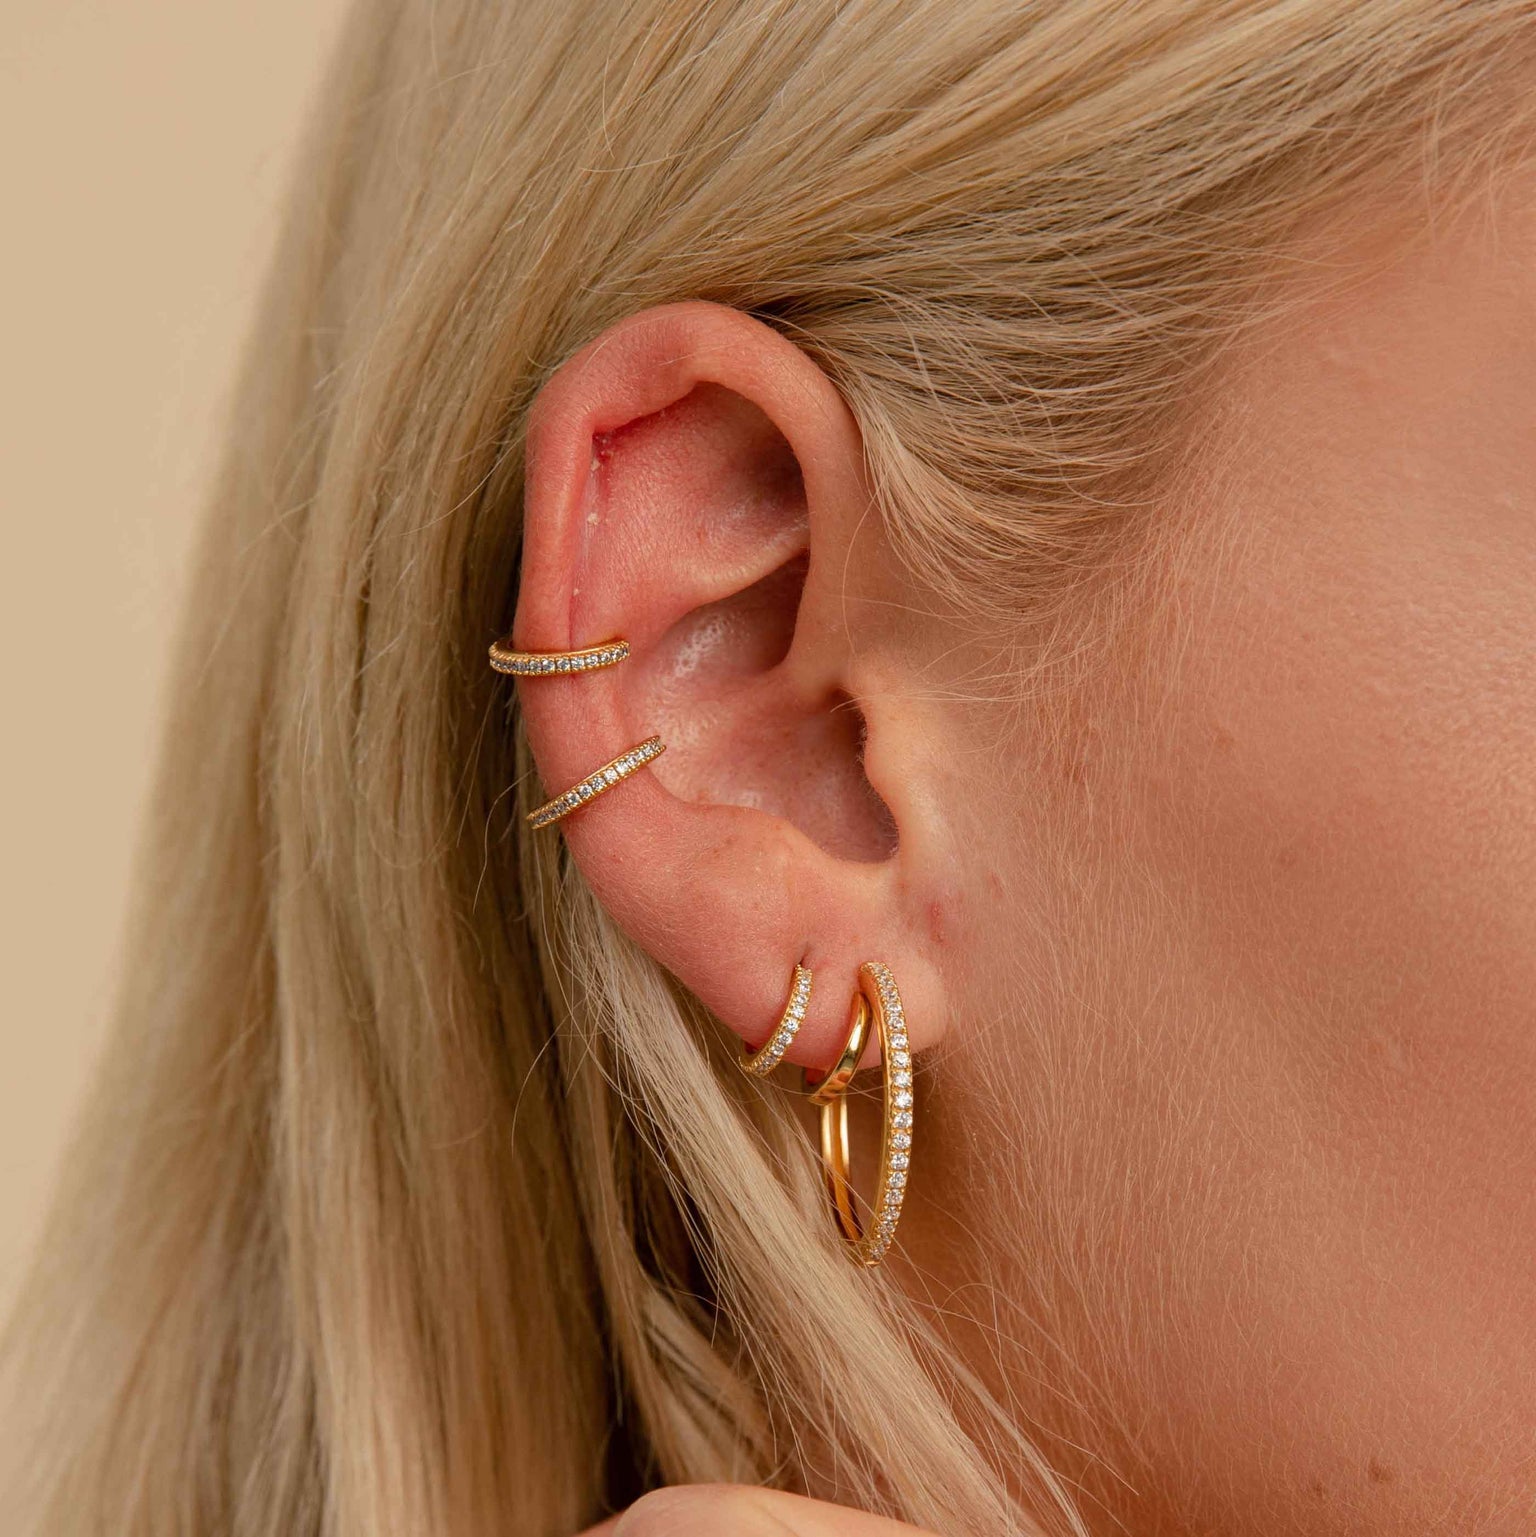 Crystal Ear Cuff in Gold worn with jewelled earrings